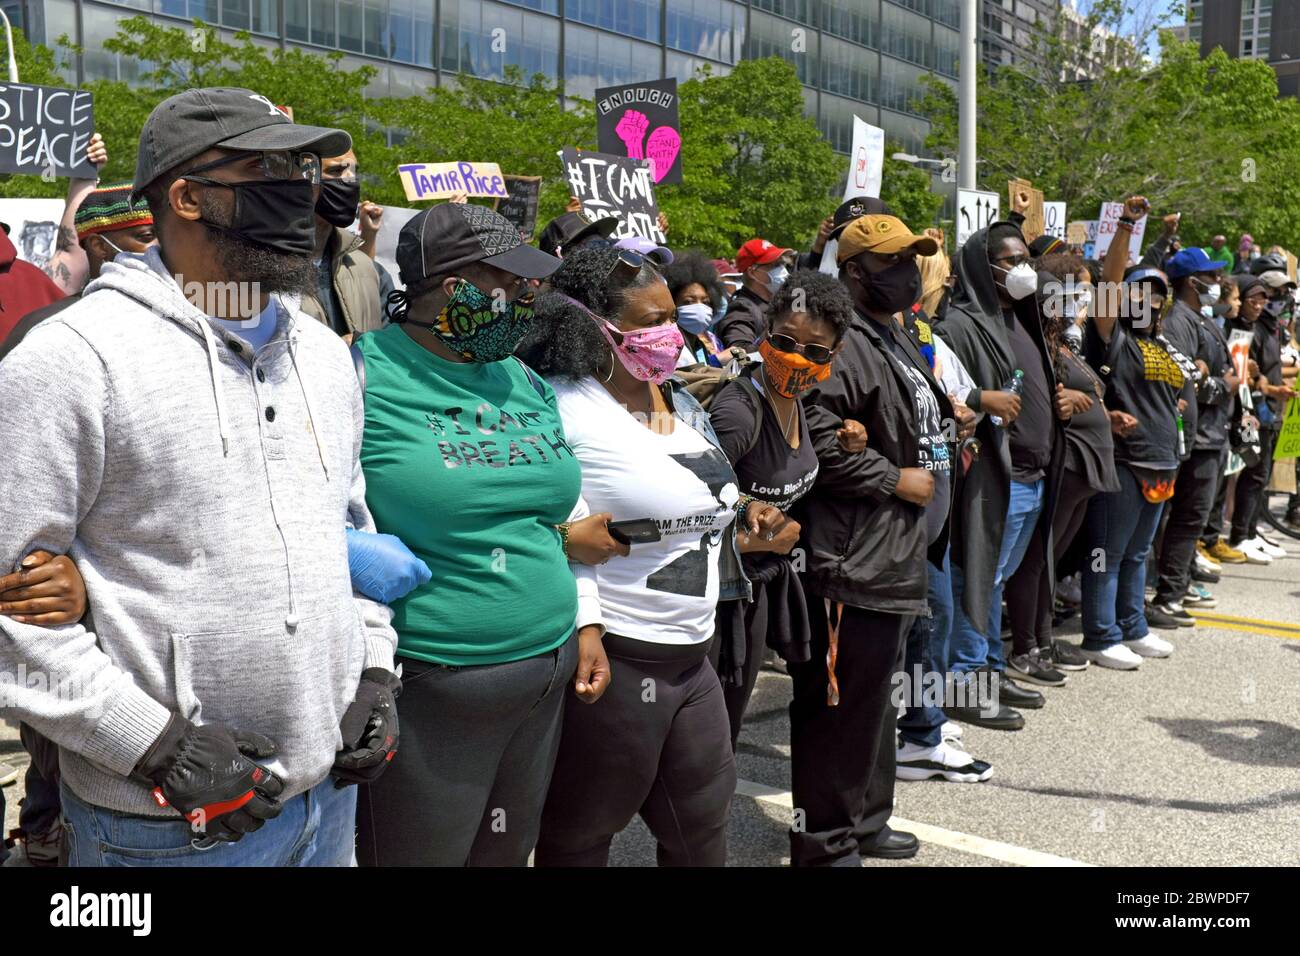 Protesters with arms linked and signs raised line-up for a protest march in downtown Cleveland, Ohio, USA against police brutality of blacks. Stock Photo